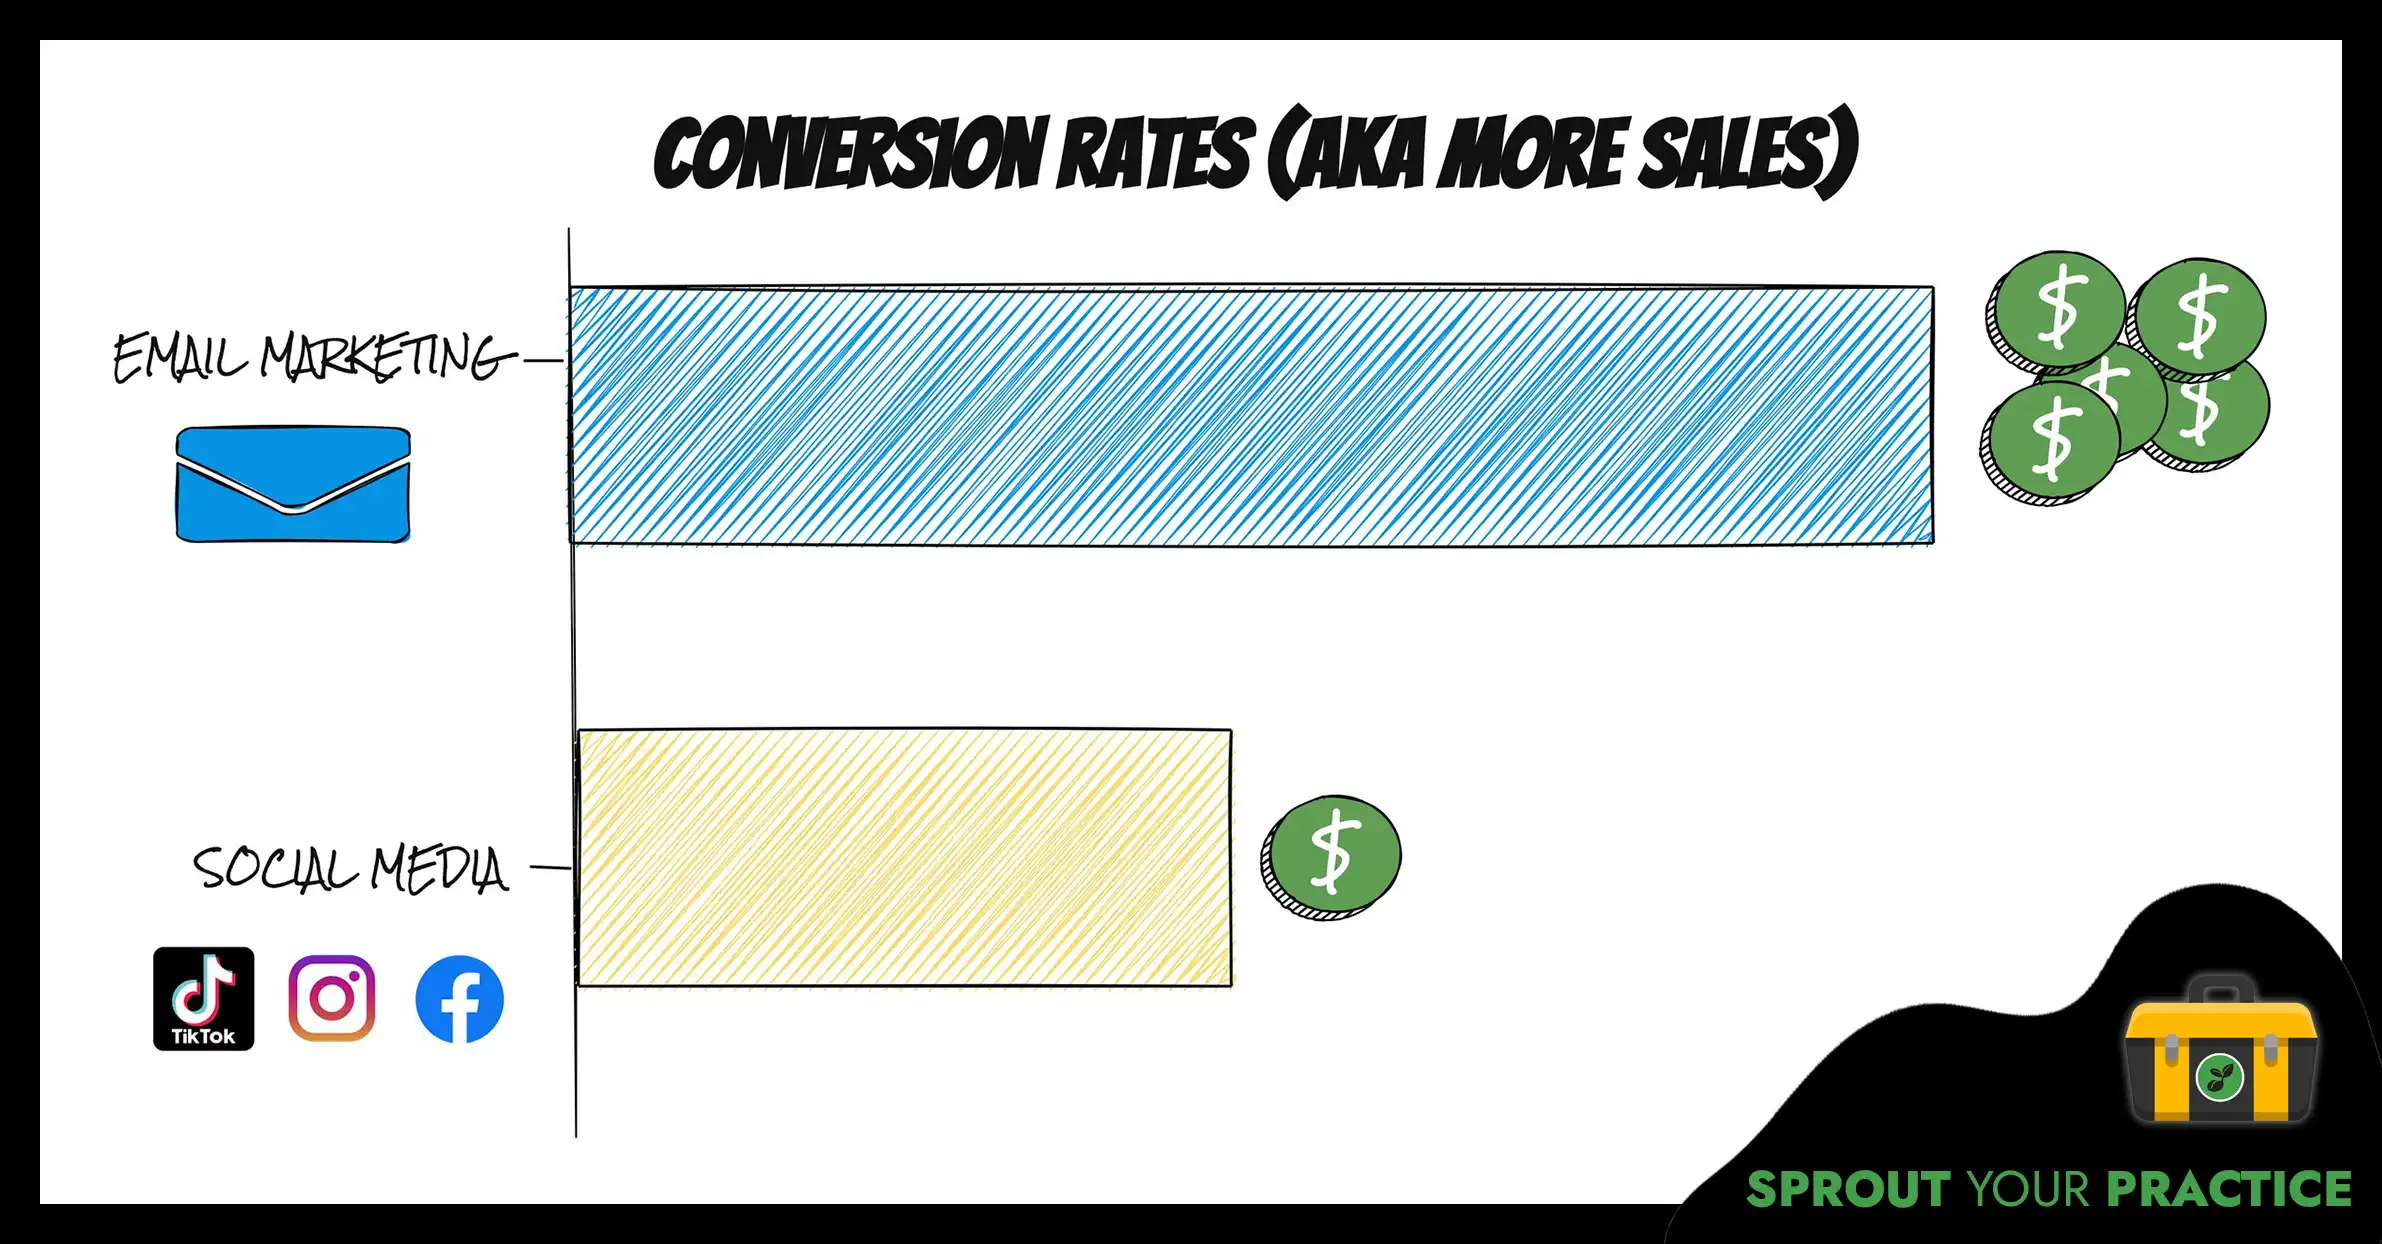 Graphic showing email marketing has higher conversion rates than social media